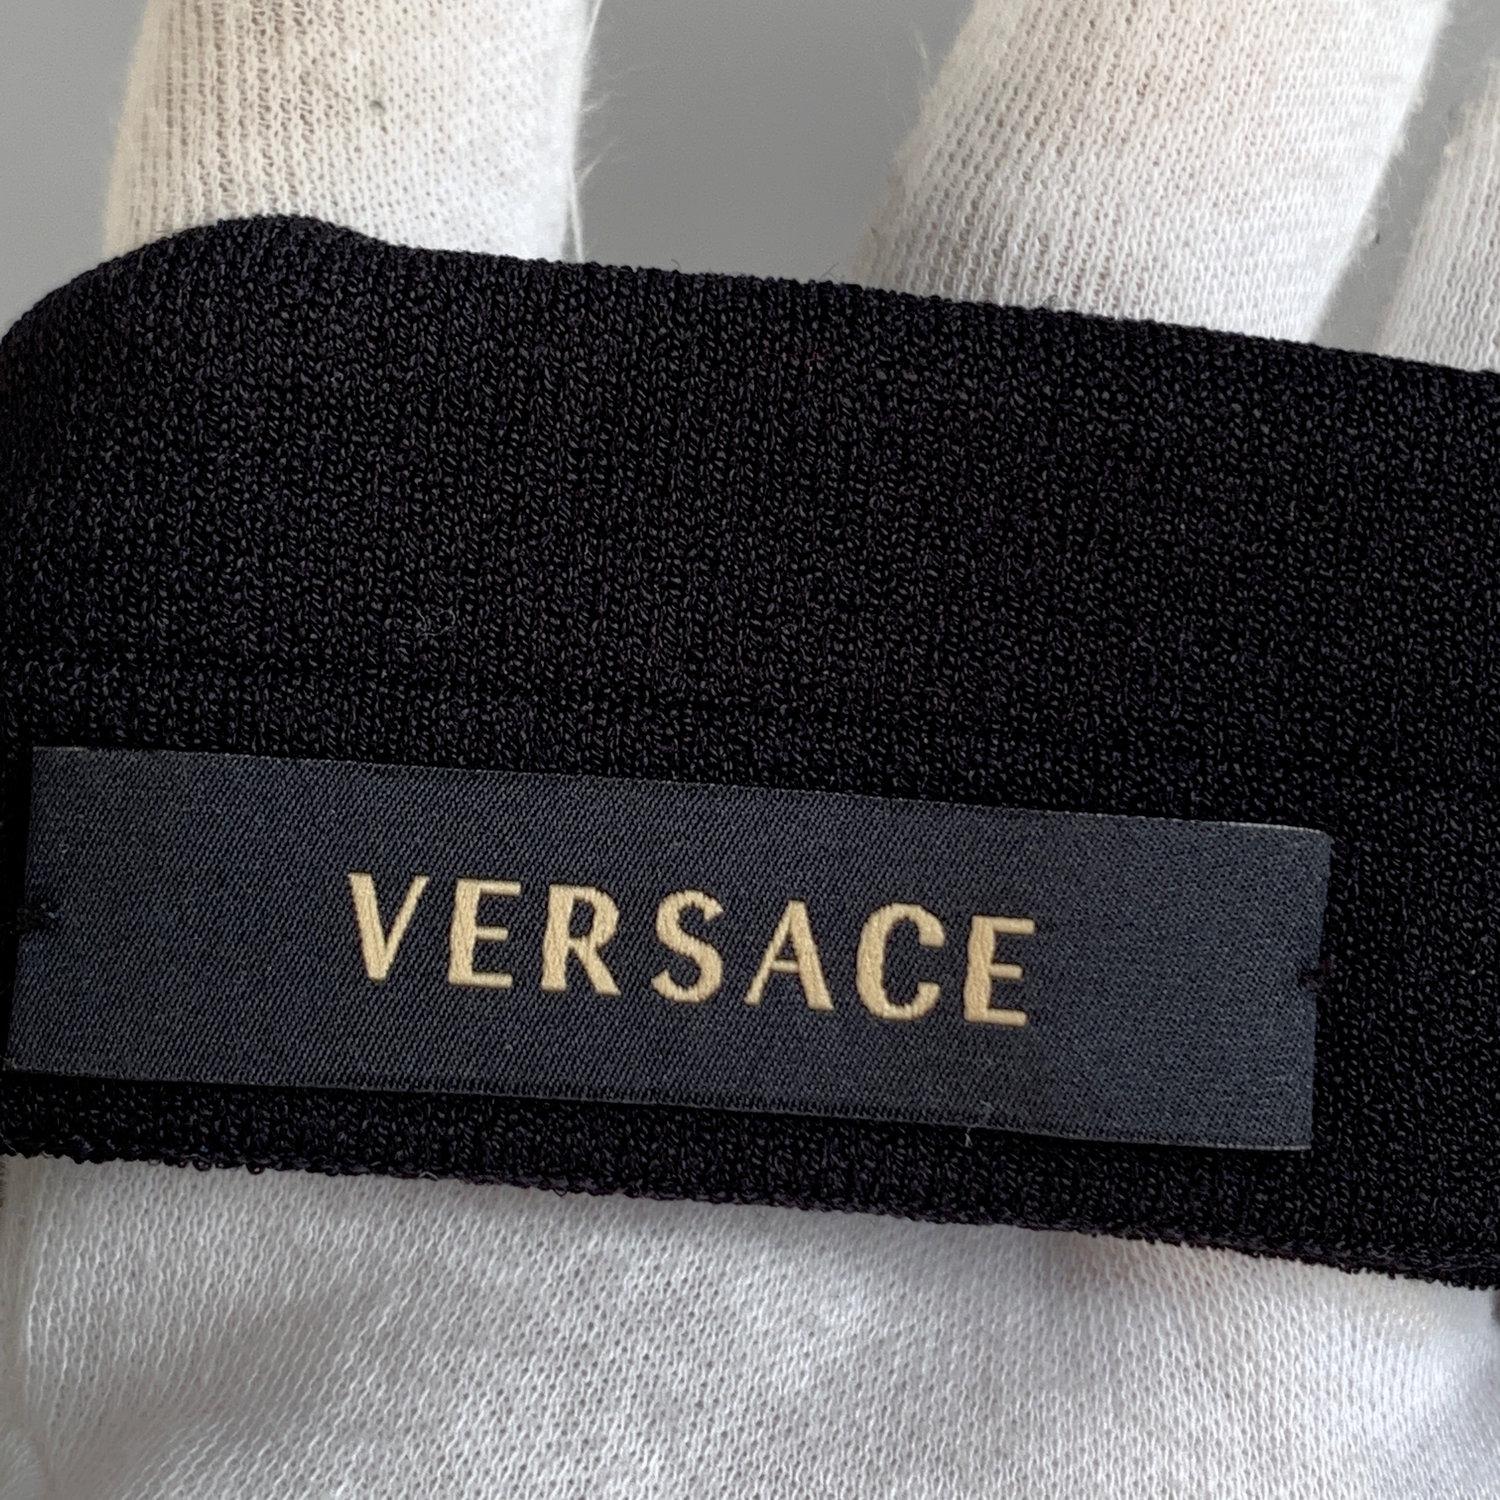 Versace Black Viscose Cut Out Sleevess Top With Collar Size 40 3